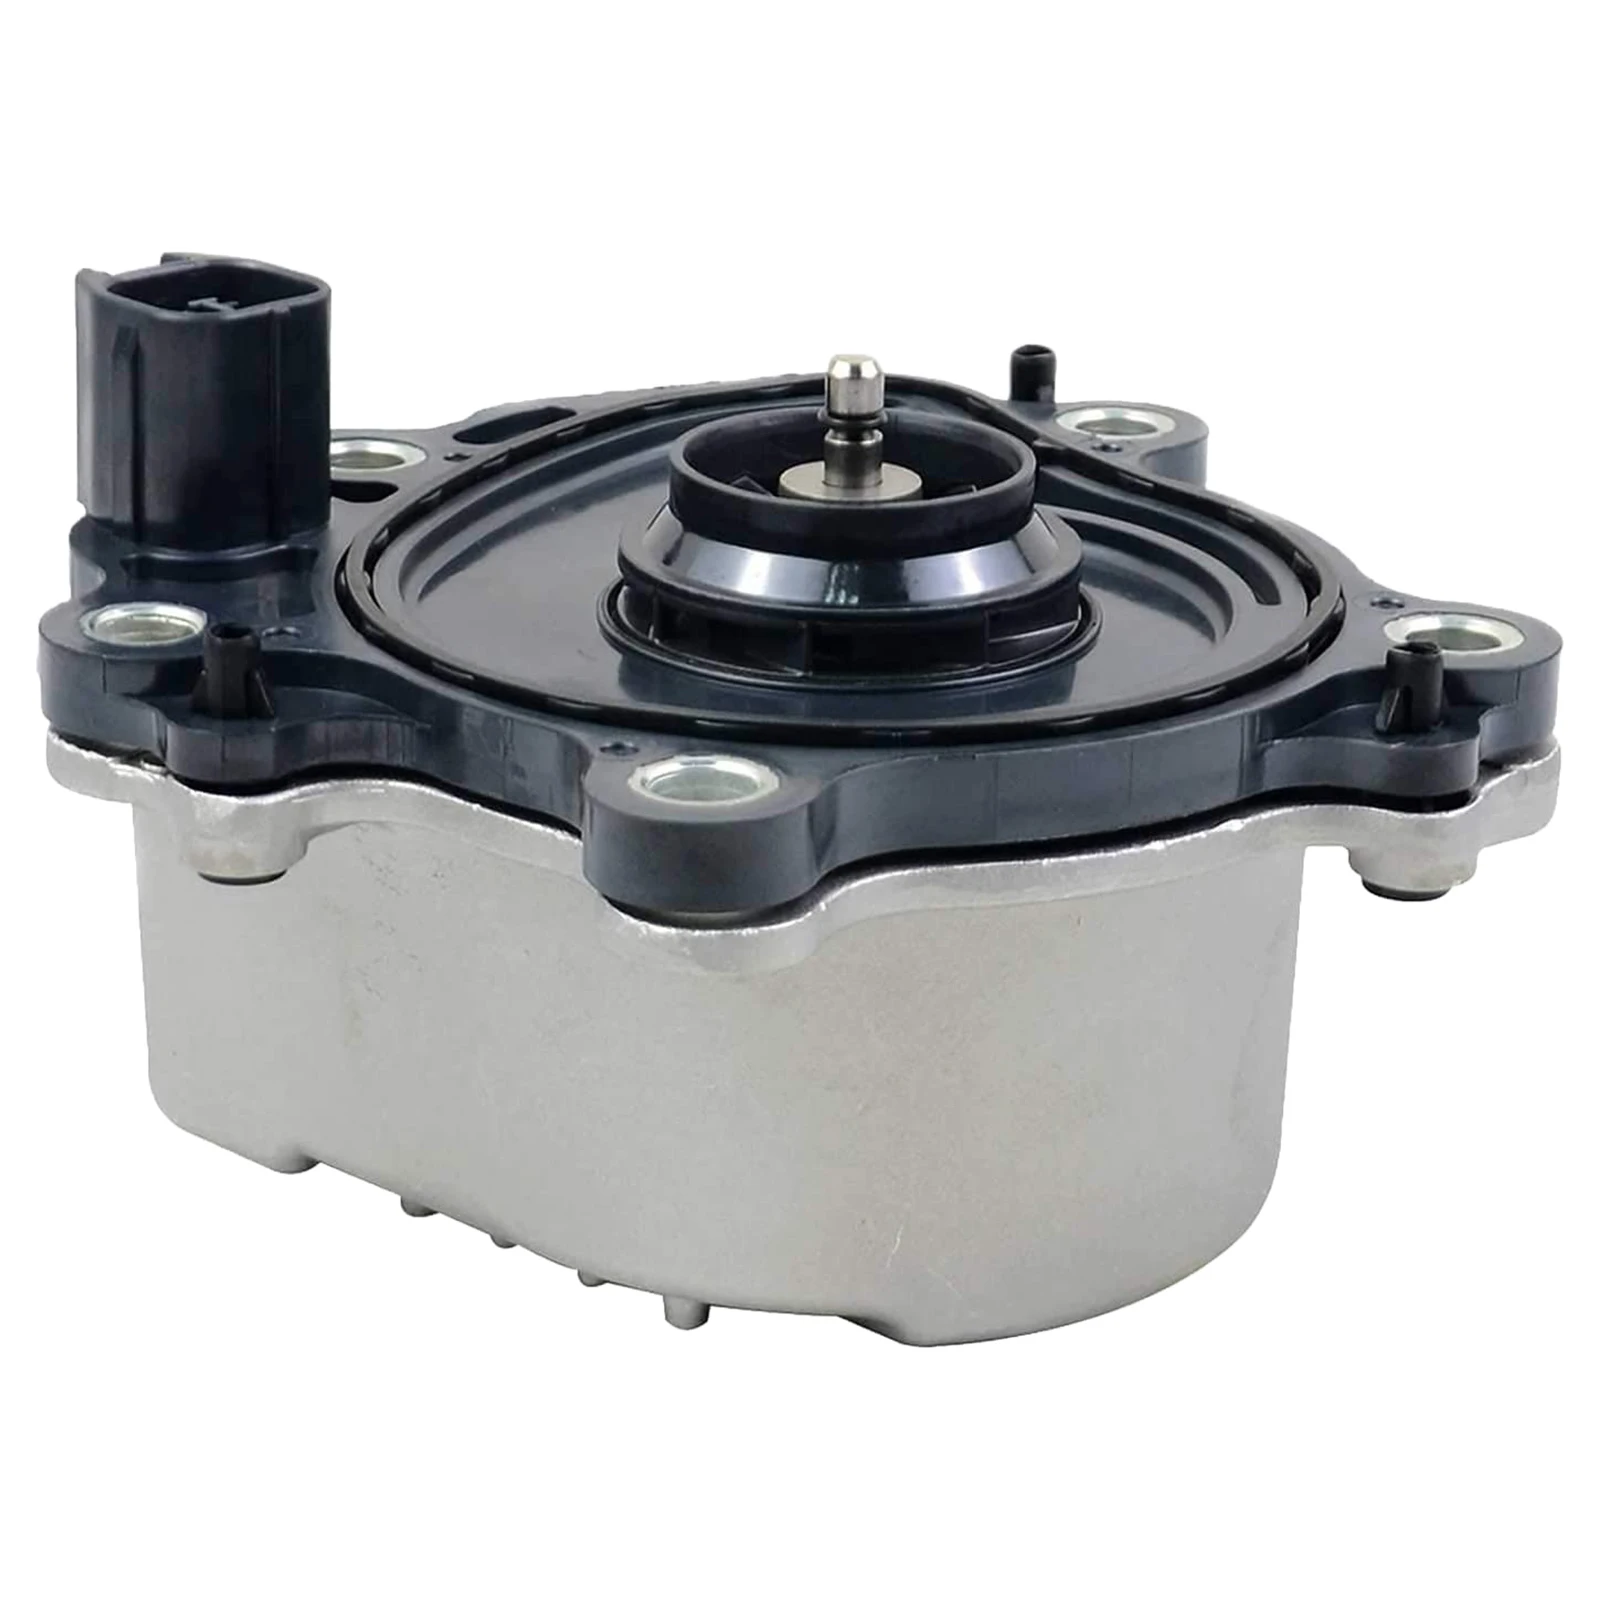 161A0-39025 Electric Water Pump Aluminium Electric Water Pump Assy for Camry for Lexus ES300h 2012 2013 2014 2015 2016 WPT-191